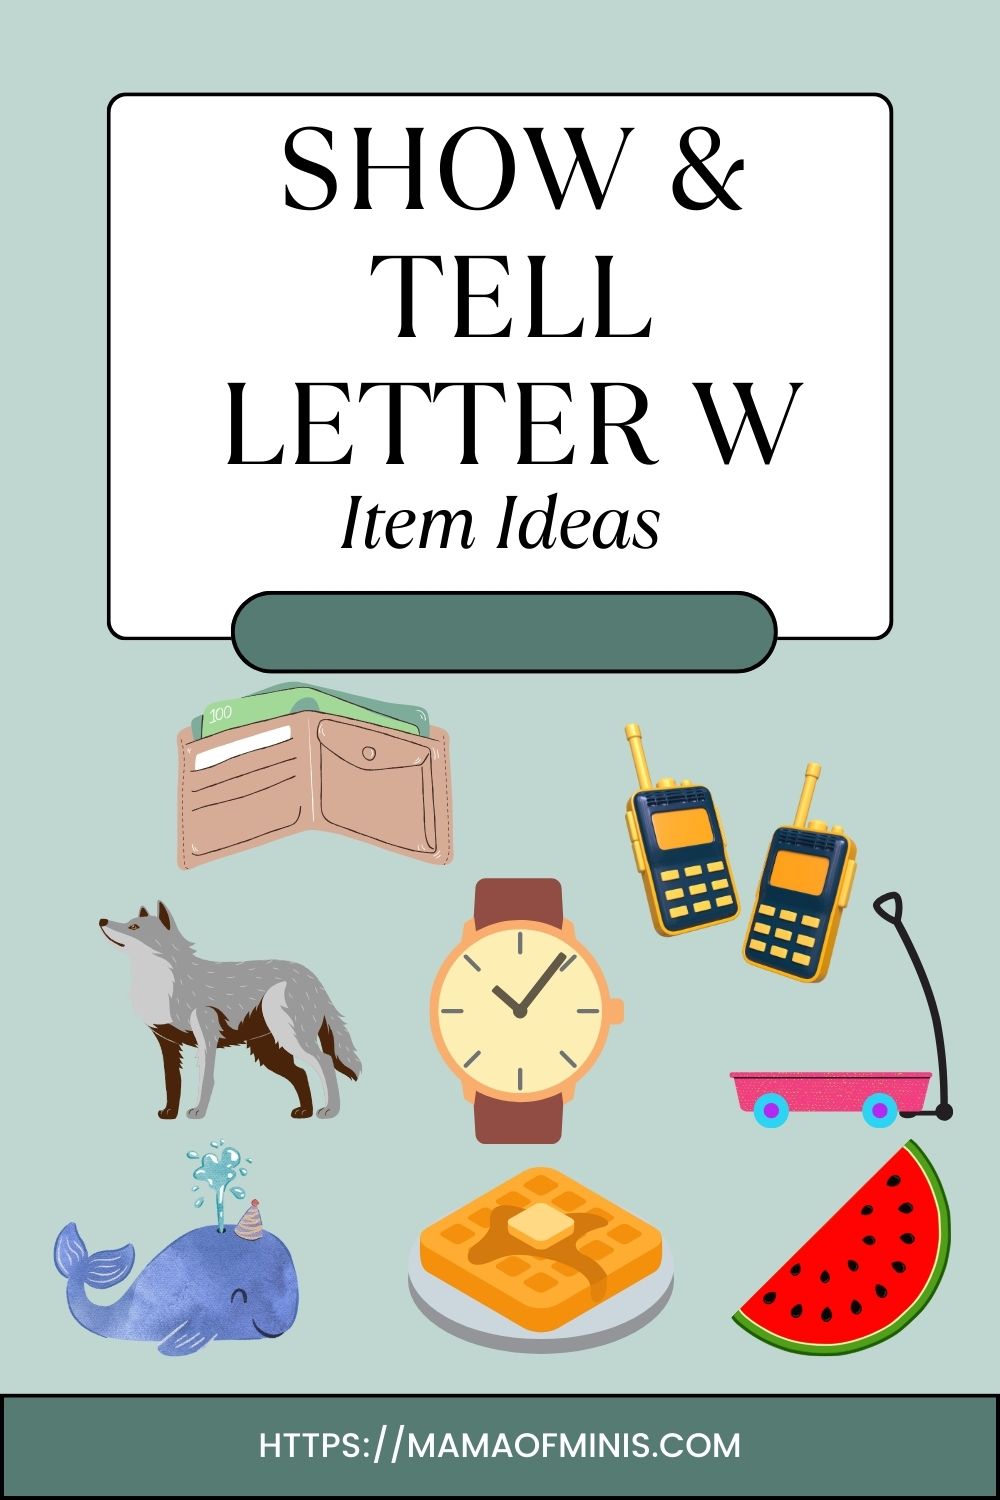 Item Ideas for Show and Tell Letter W